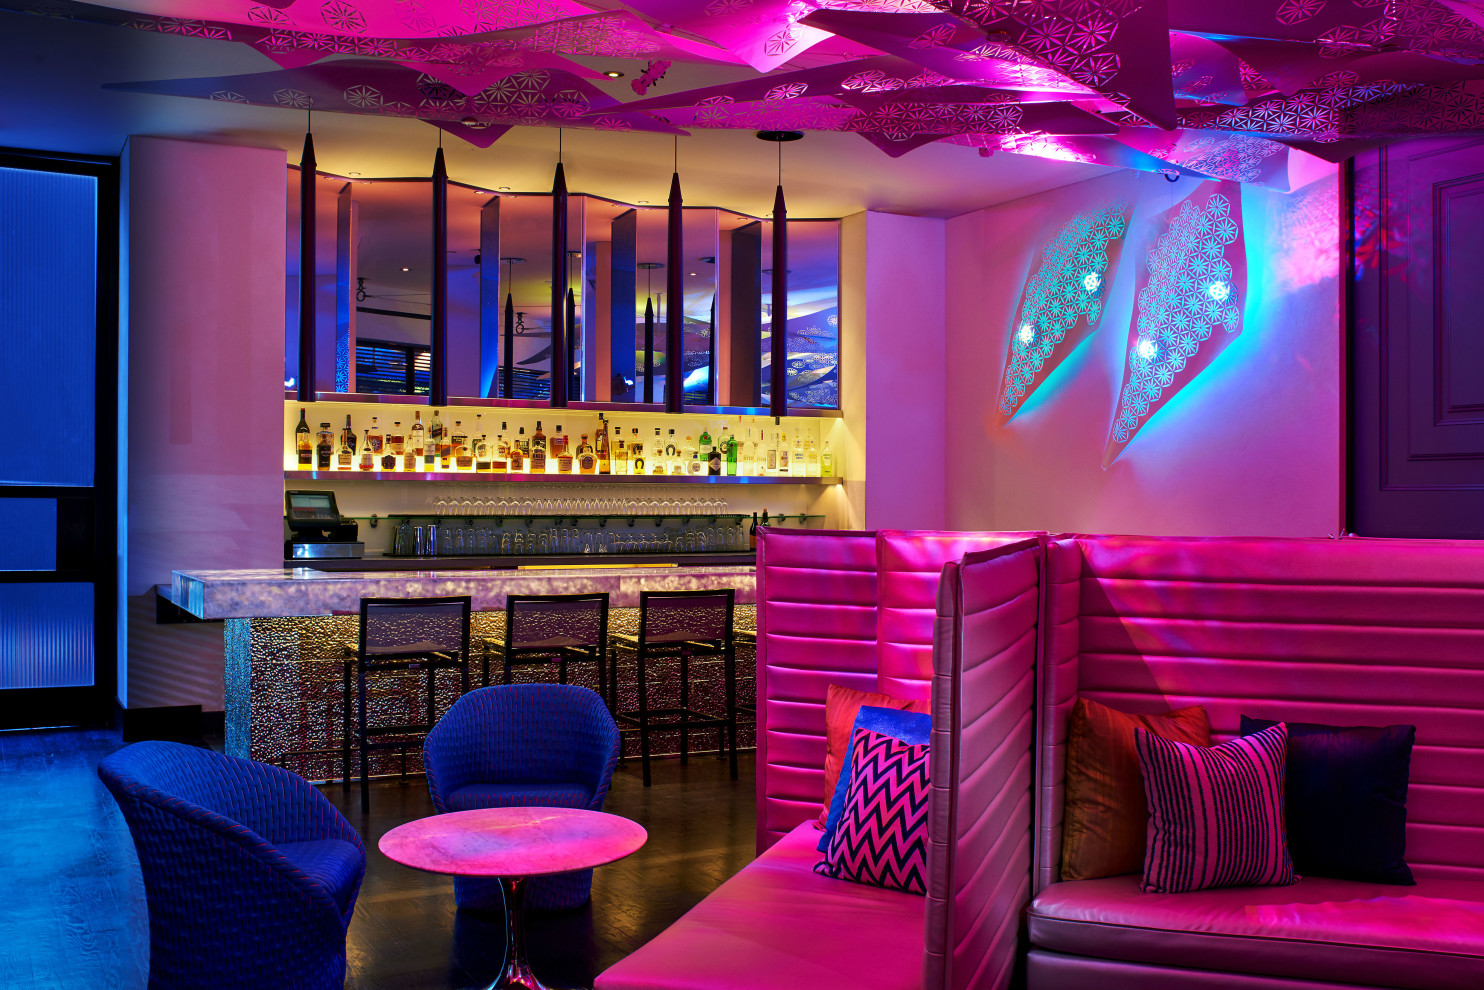 Get playful at W Hotel West Hollywood